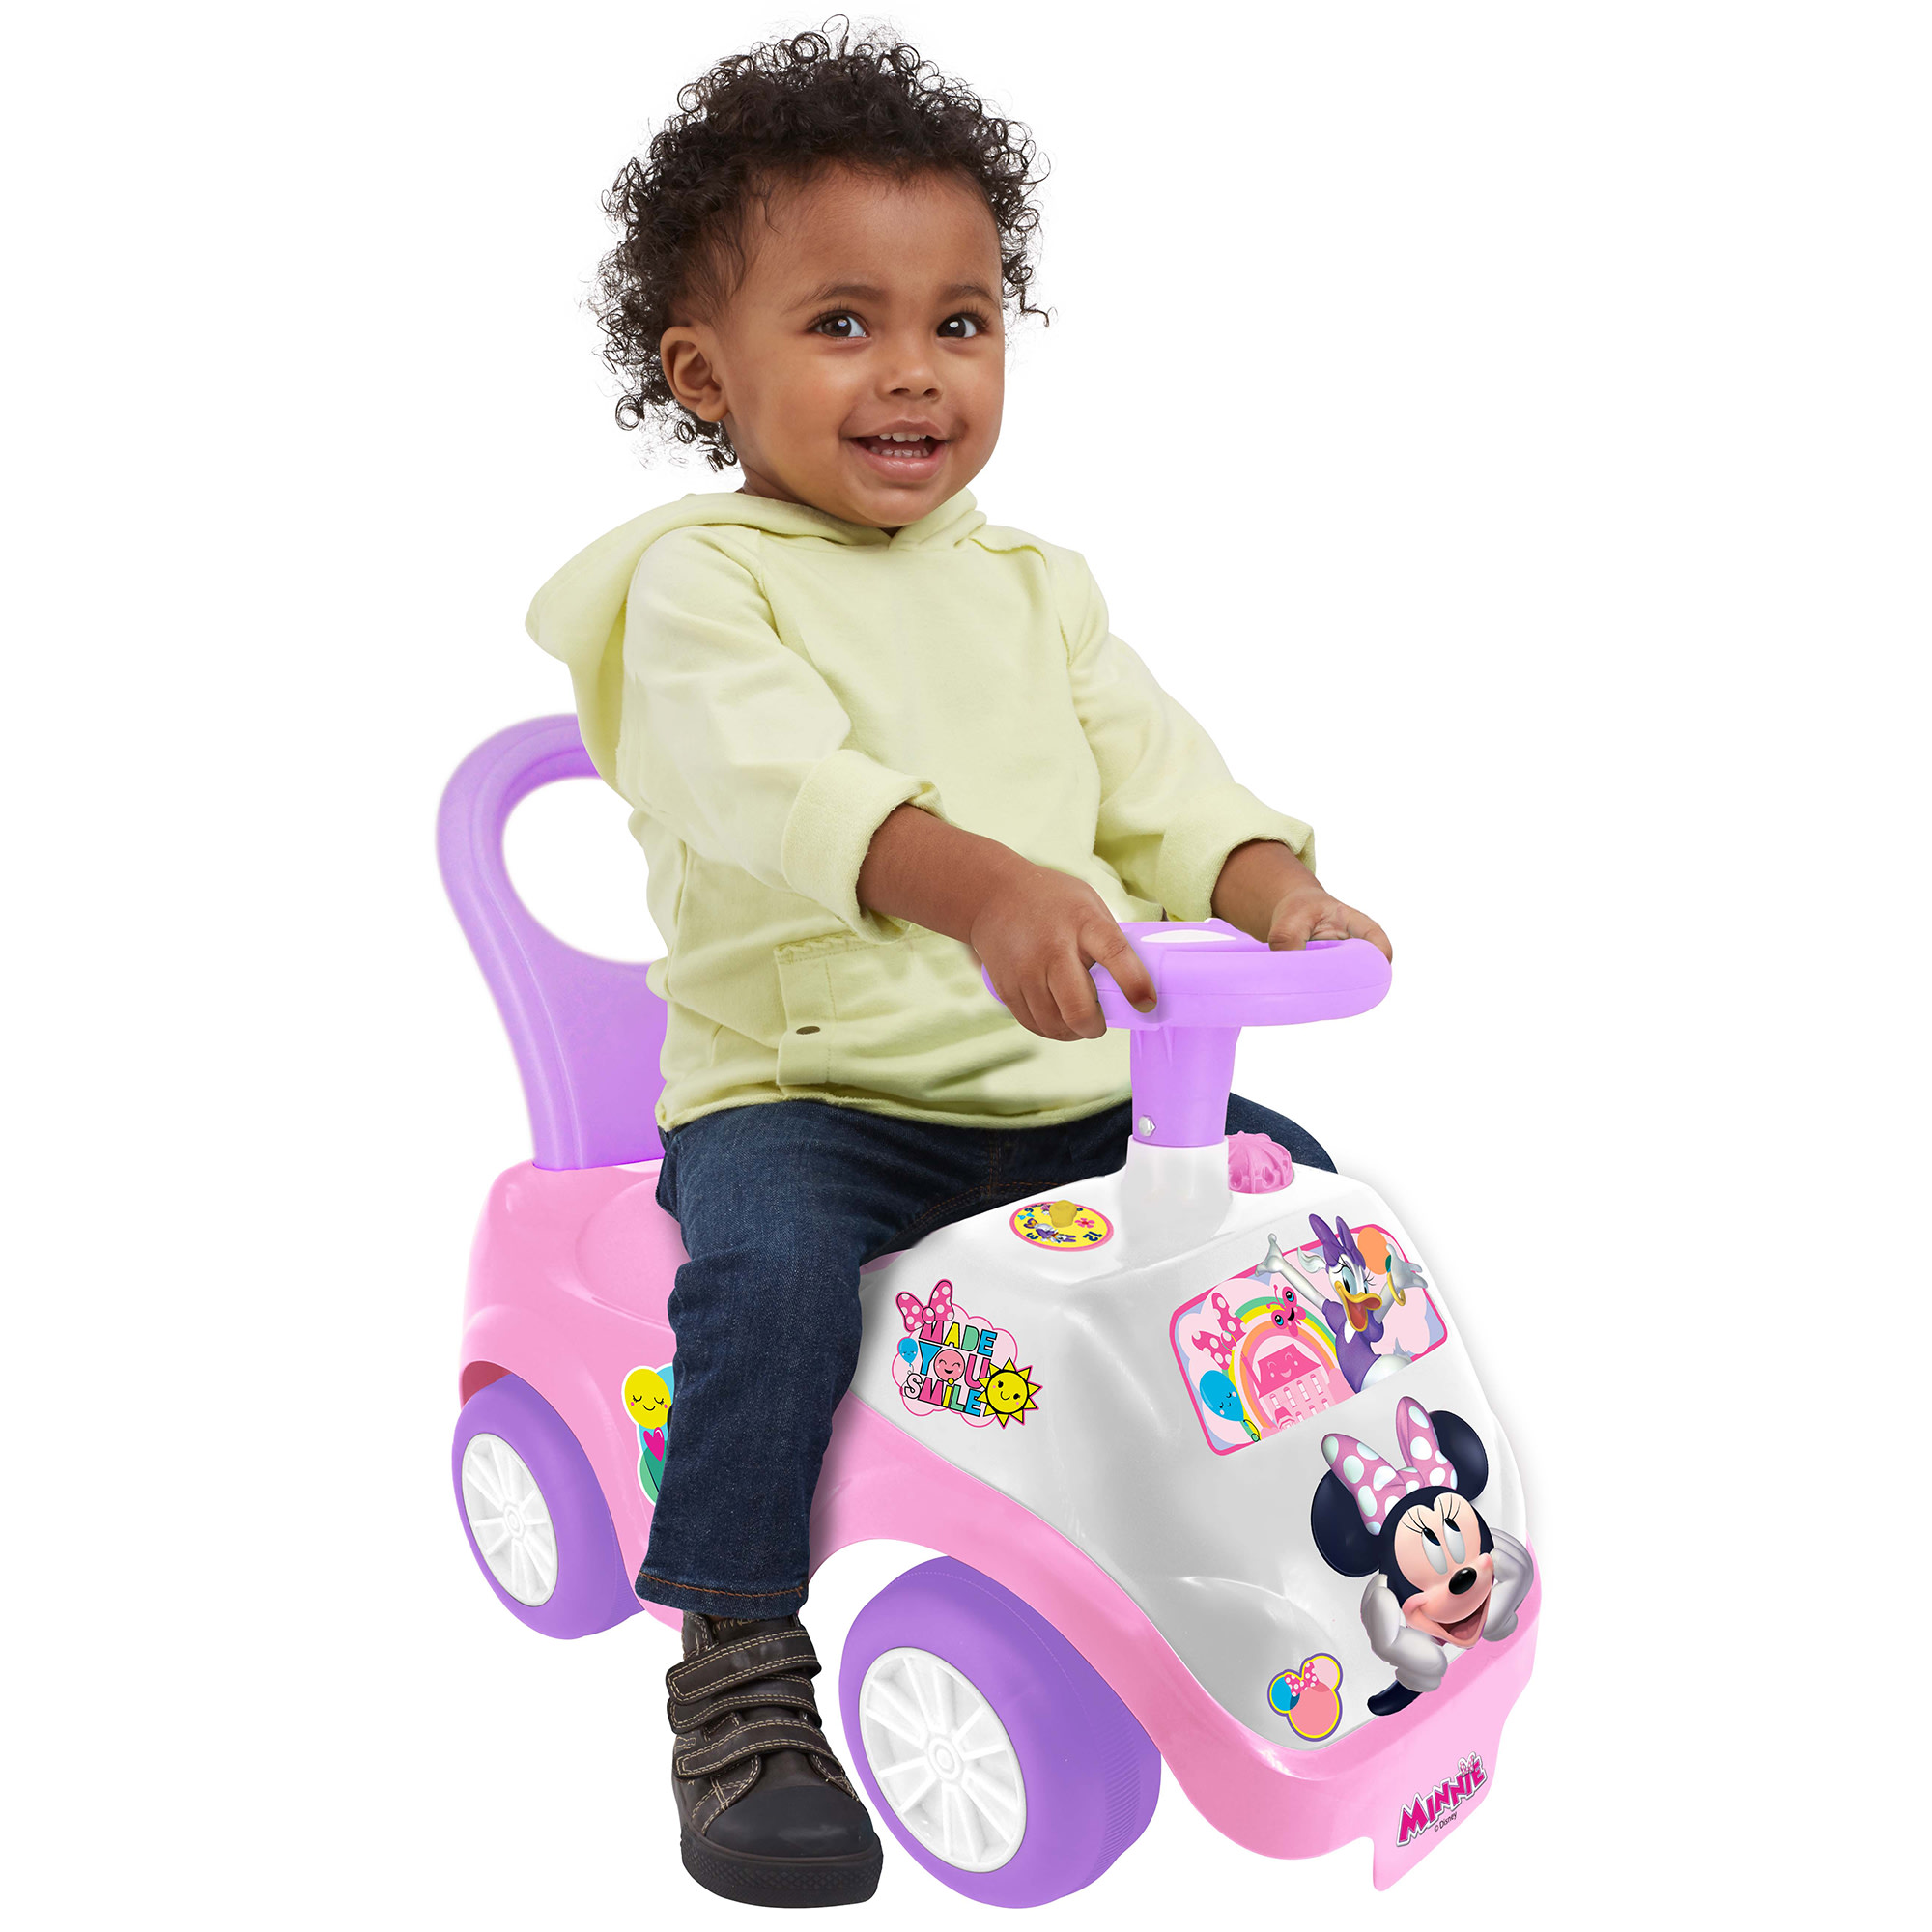 Kiddieland Disney Lights 'N' Sounds Ride-On: Minnie Mouse Kids Interactive Push Toy Car, Foot To Floor, Toddlers, Ages 12-36 Months - image 4 of 5